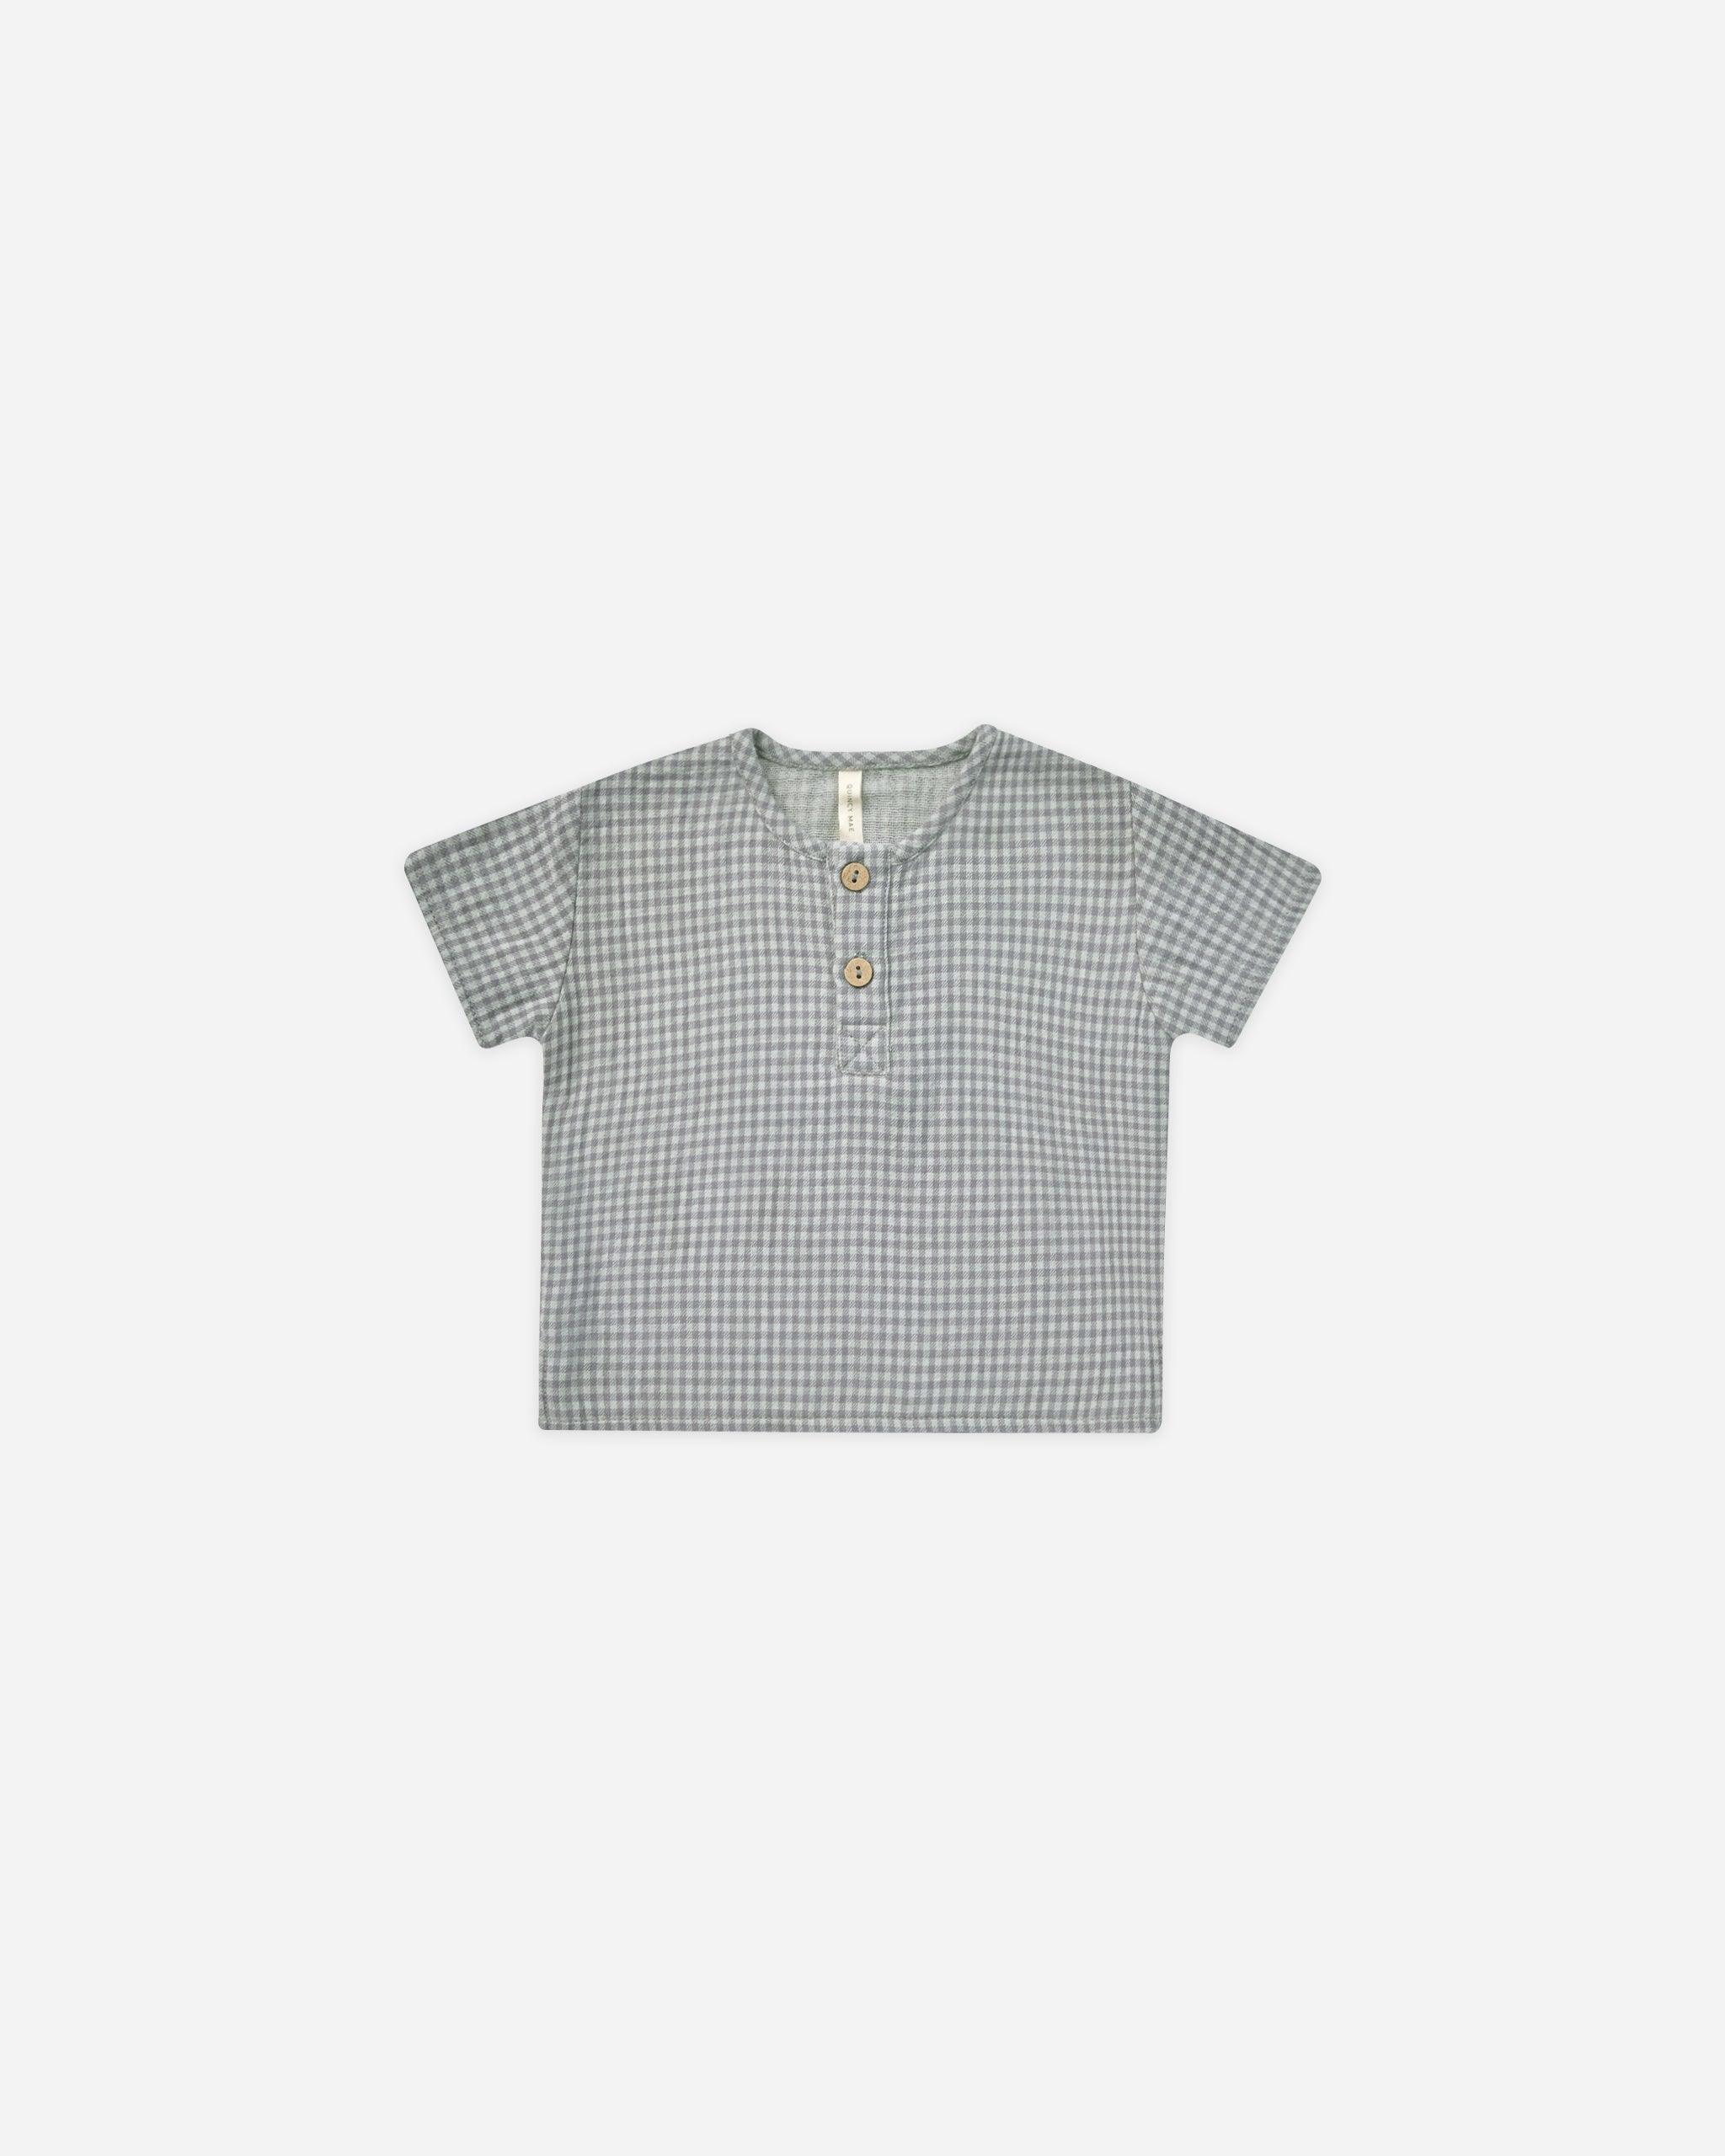 Henry Top || Blue Gingham - Rylee + Cru | Kids Clothes | Trendy Baby Clothes | Modern Infant Outfits |